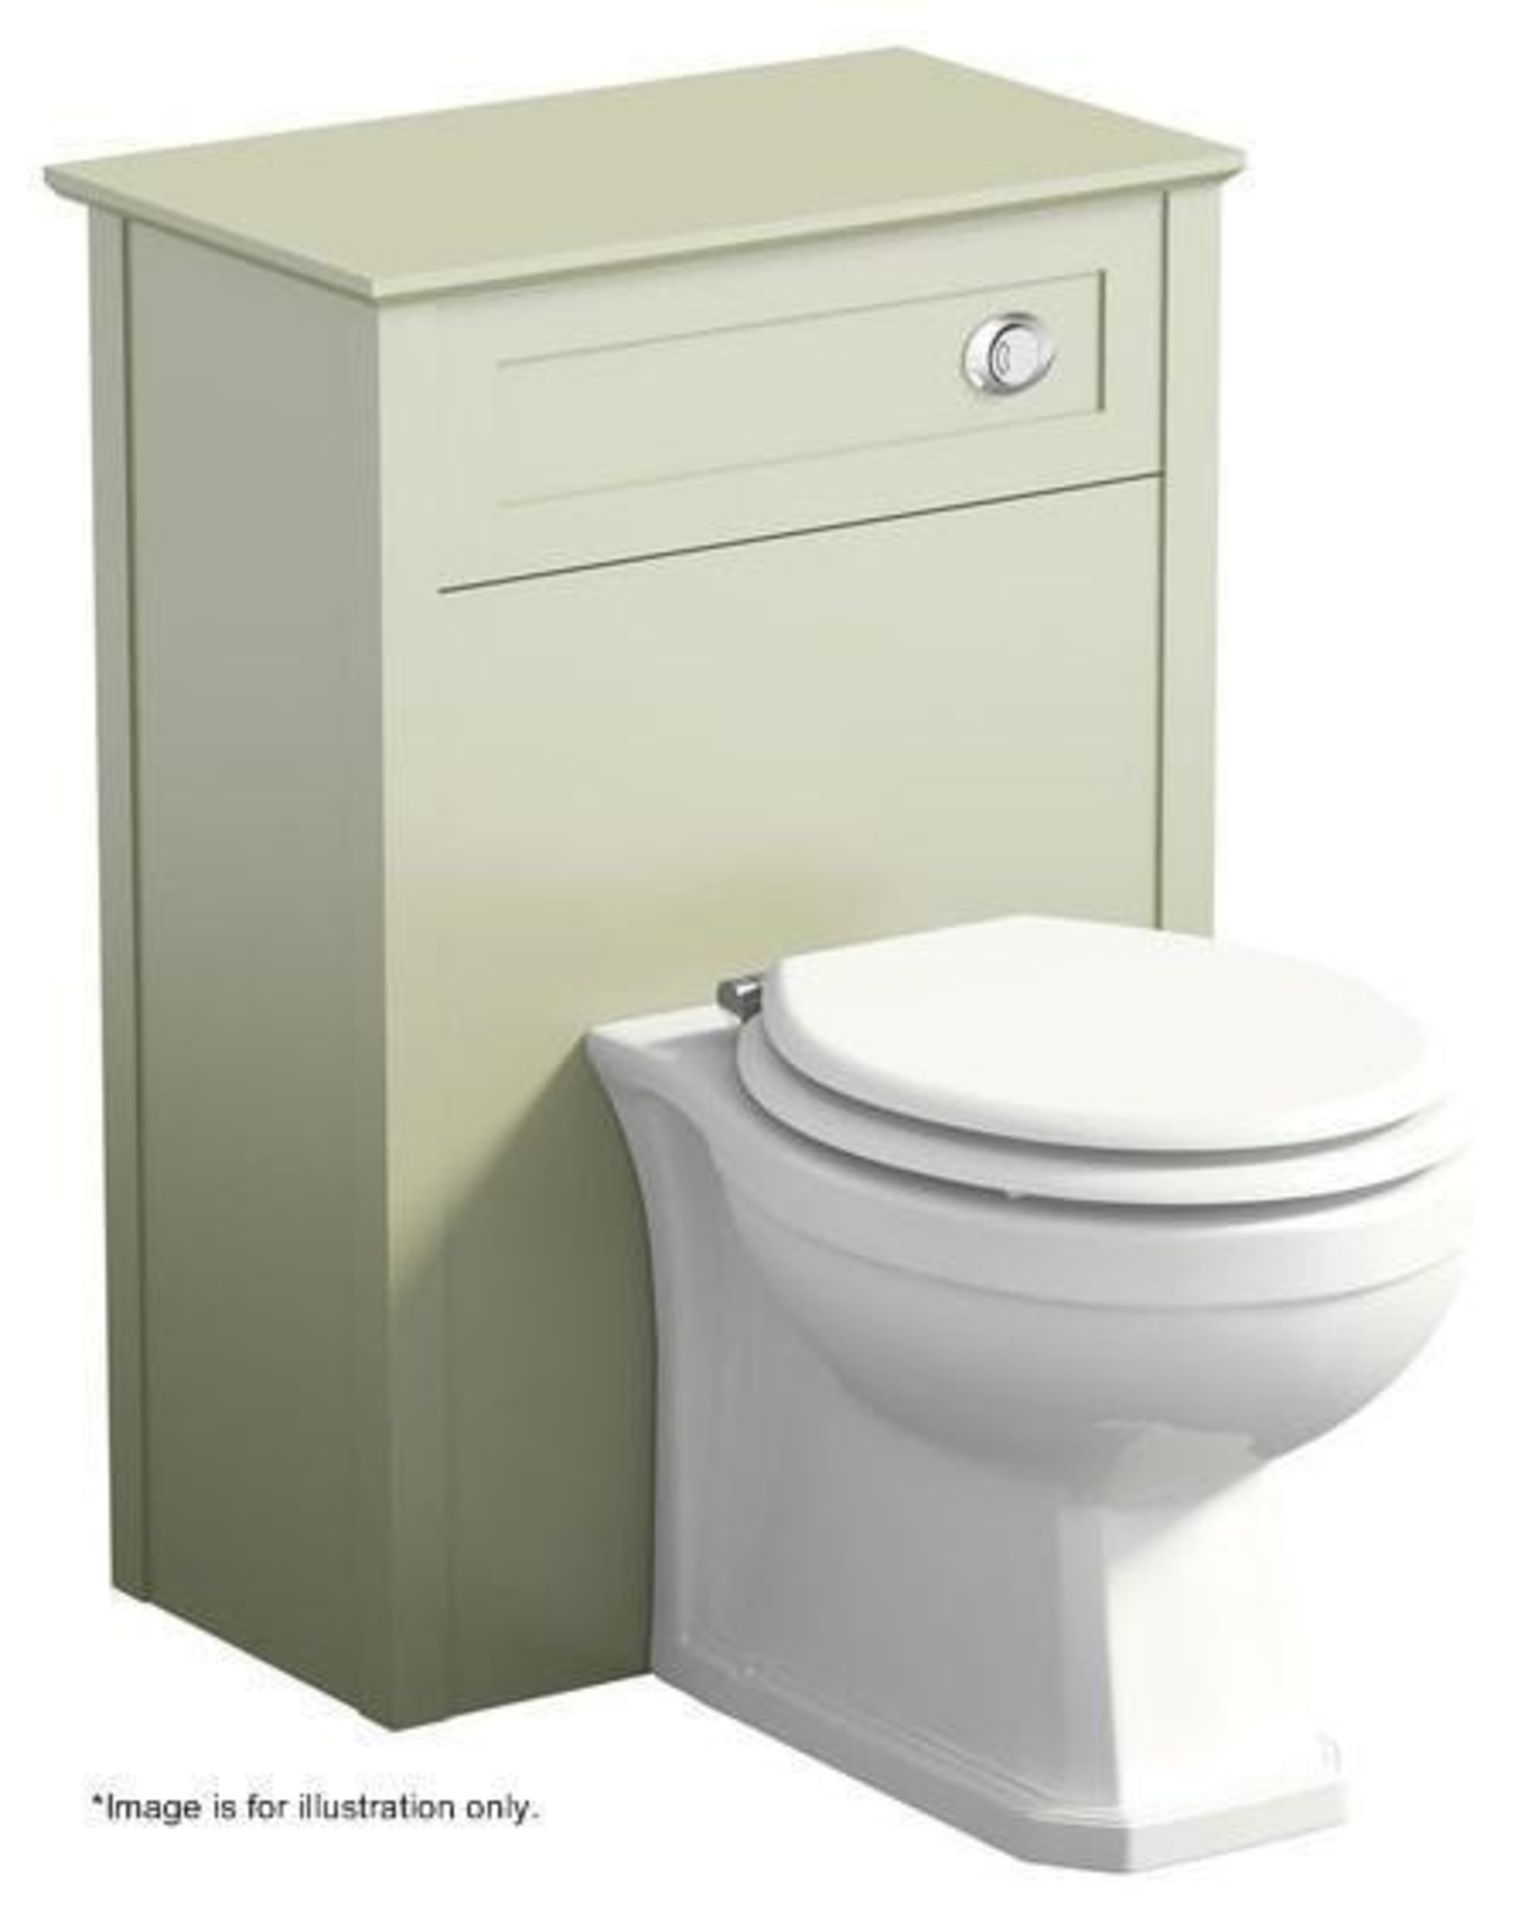 1 x Camberley Sage Back To Wall Toilet Unit - Dimensions (approx): 51 x 30 x H80cm - Pan Is NOT Inc